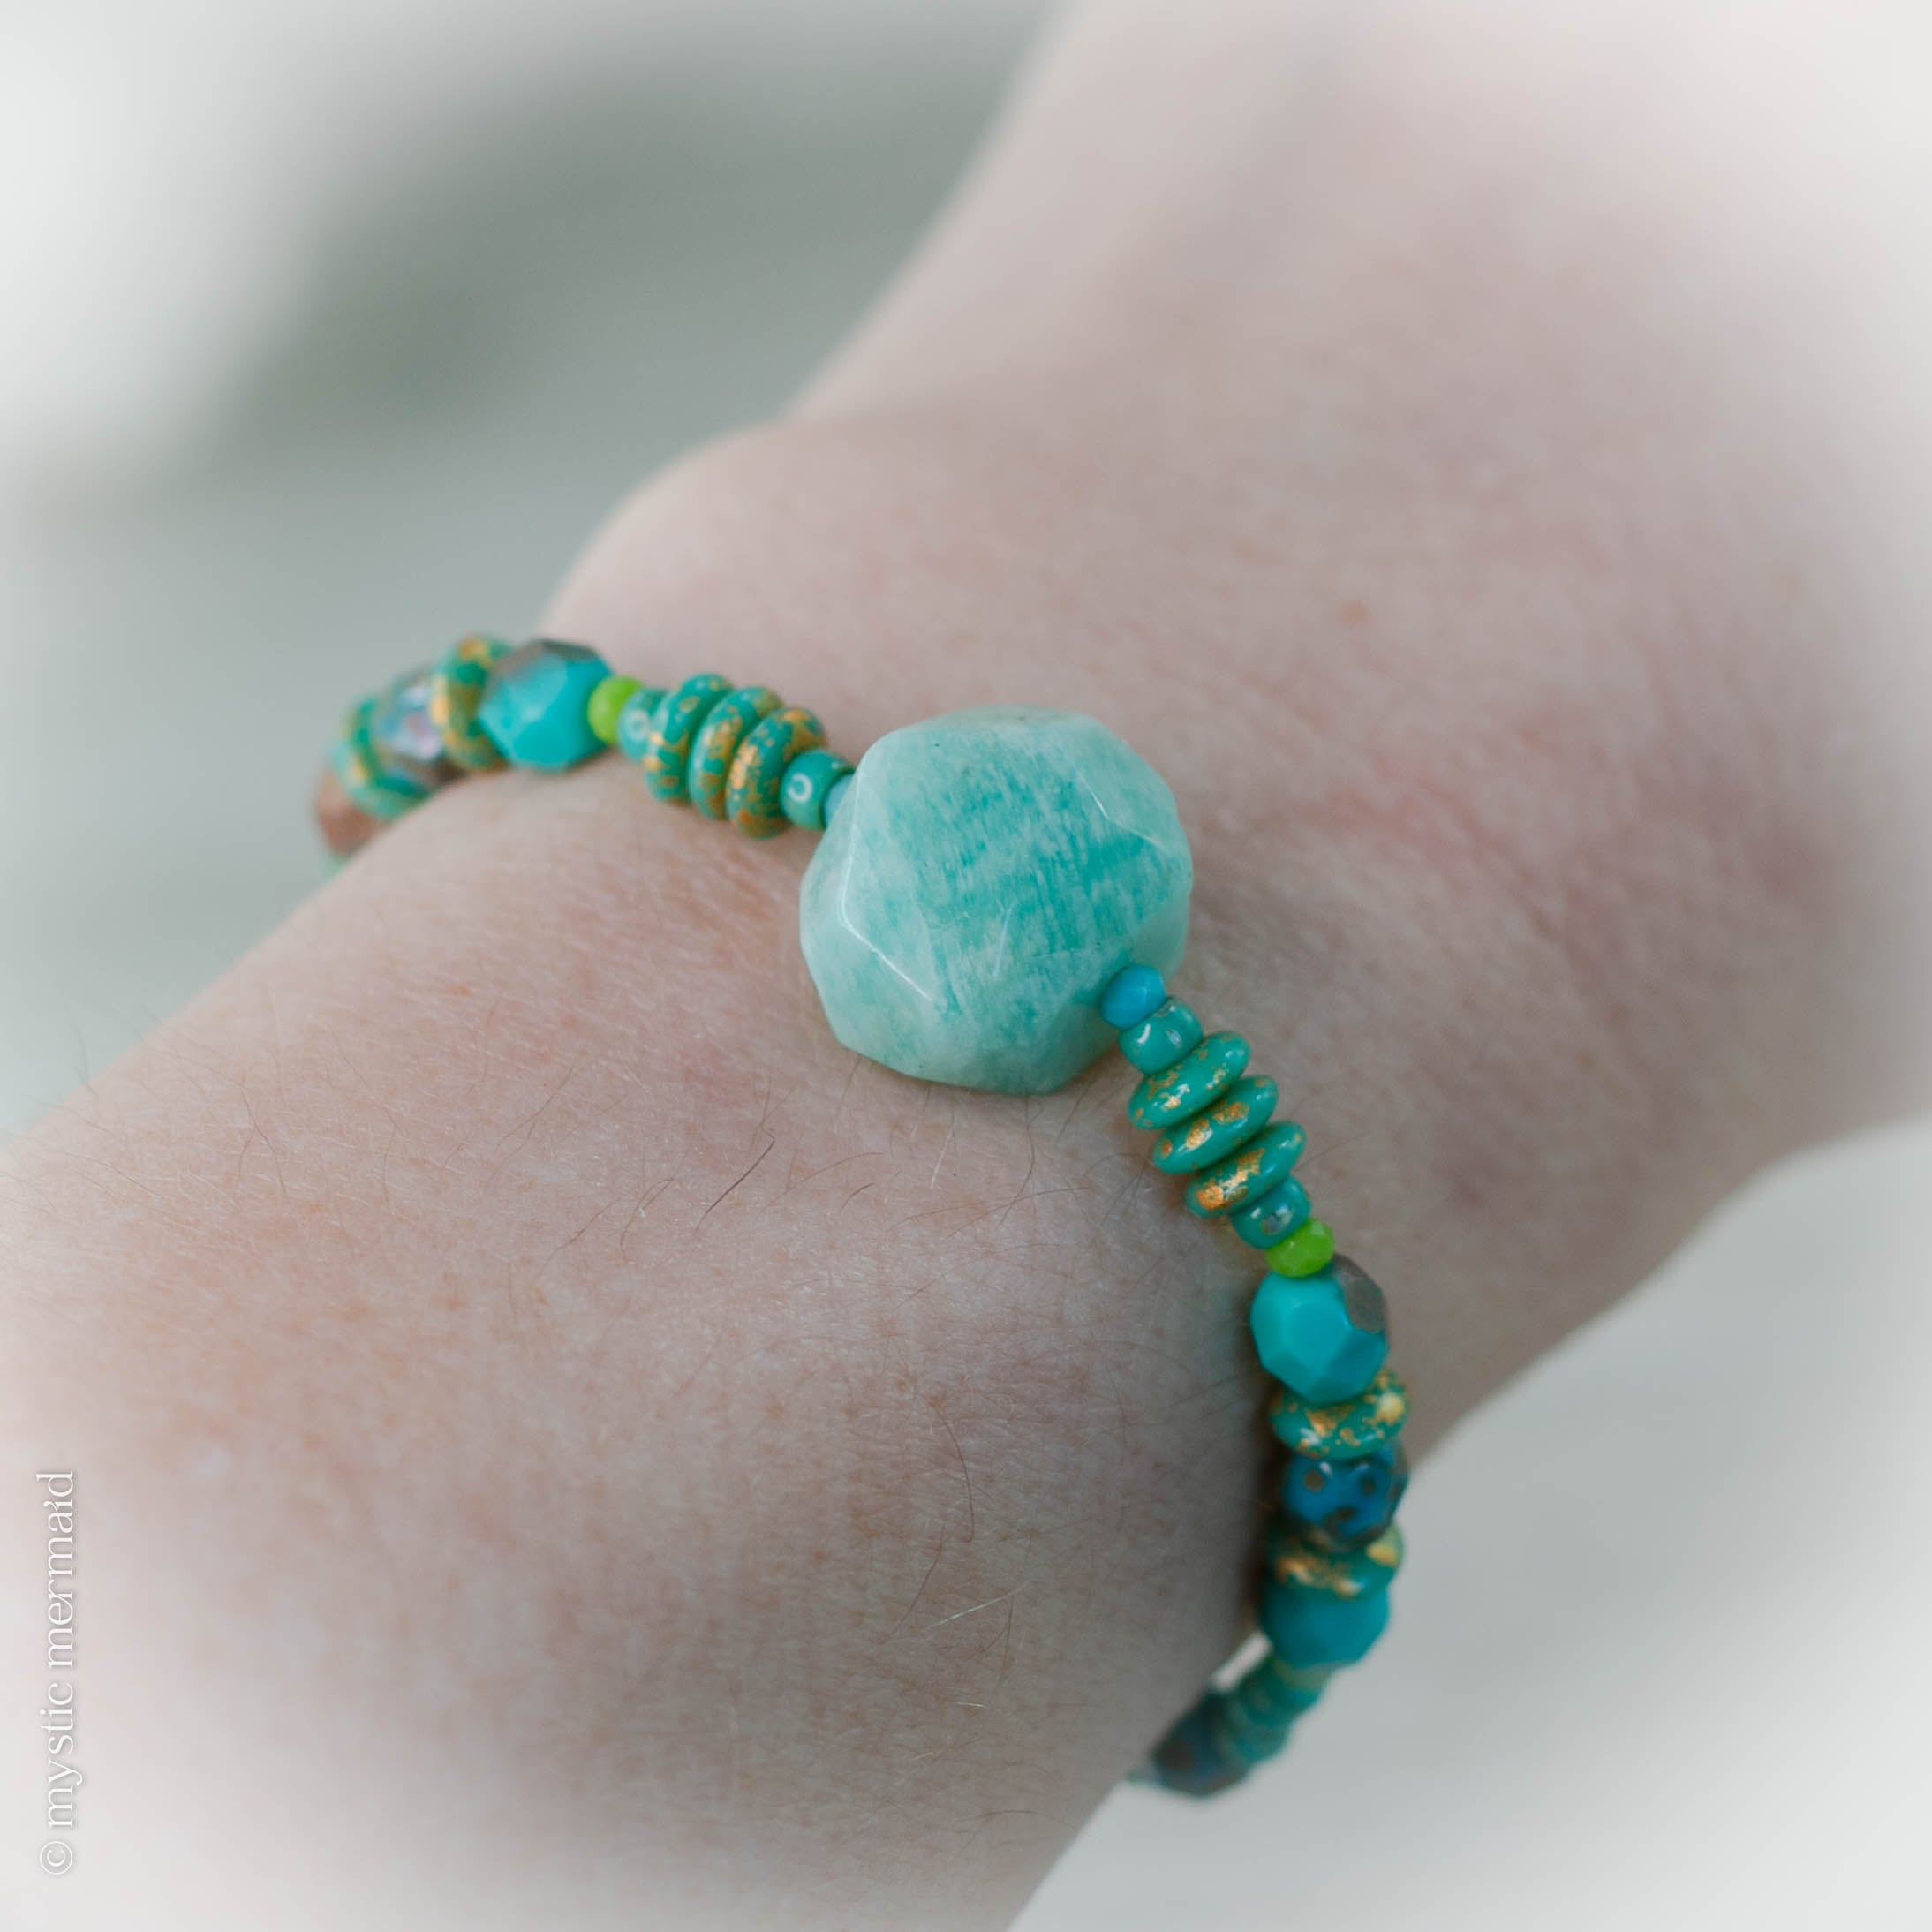 SAVE with Soothe and Calm Amazonite Bundle with FREE GIFT